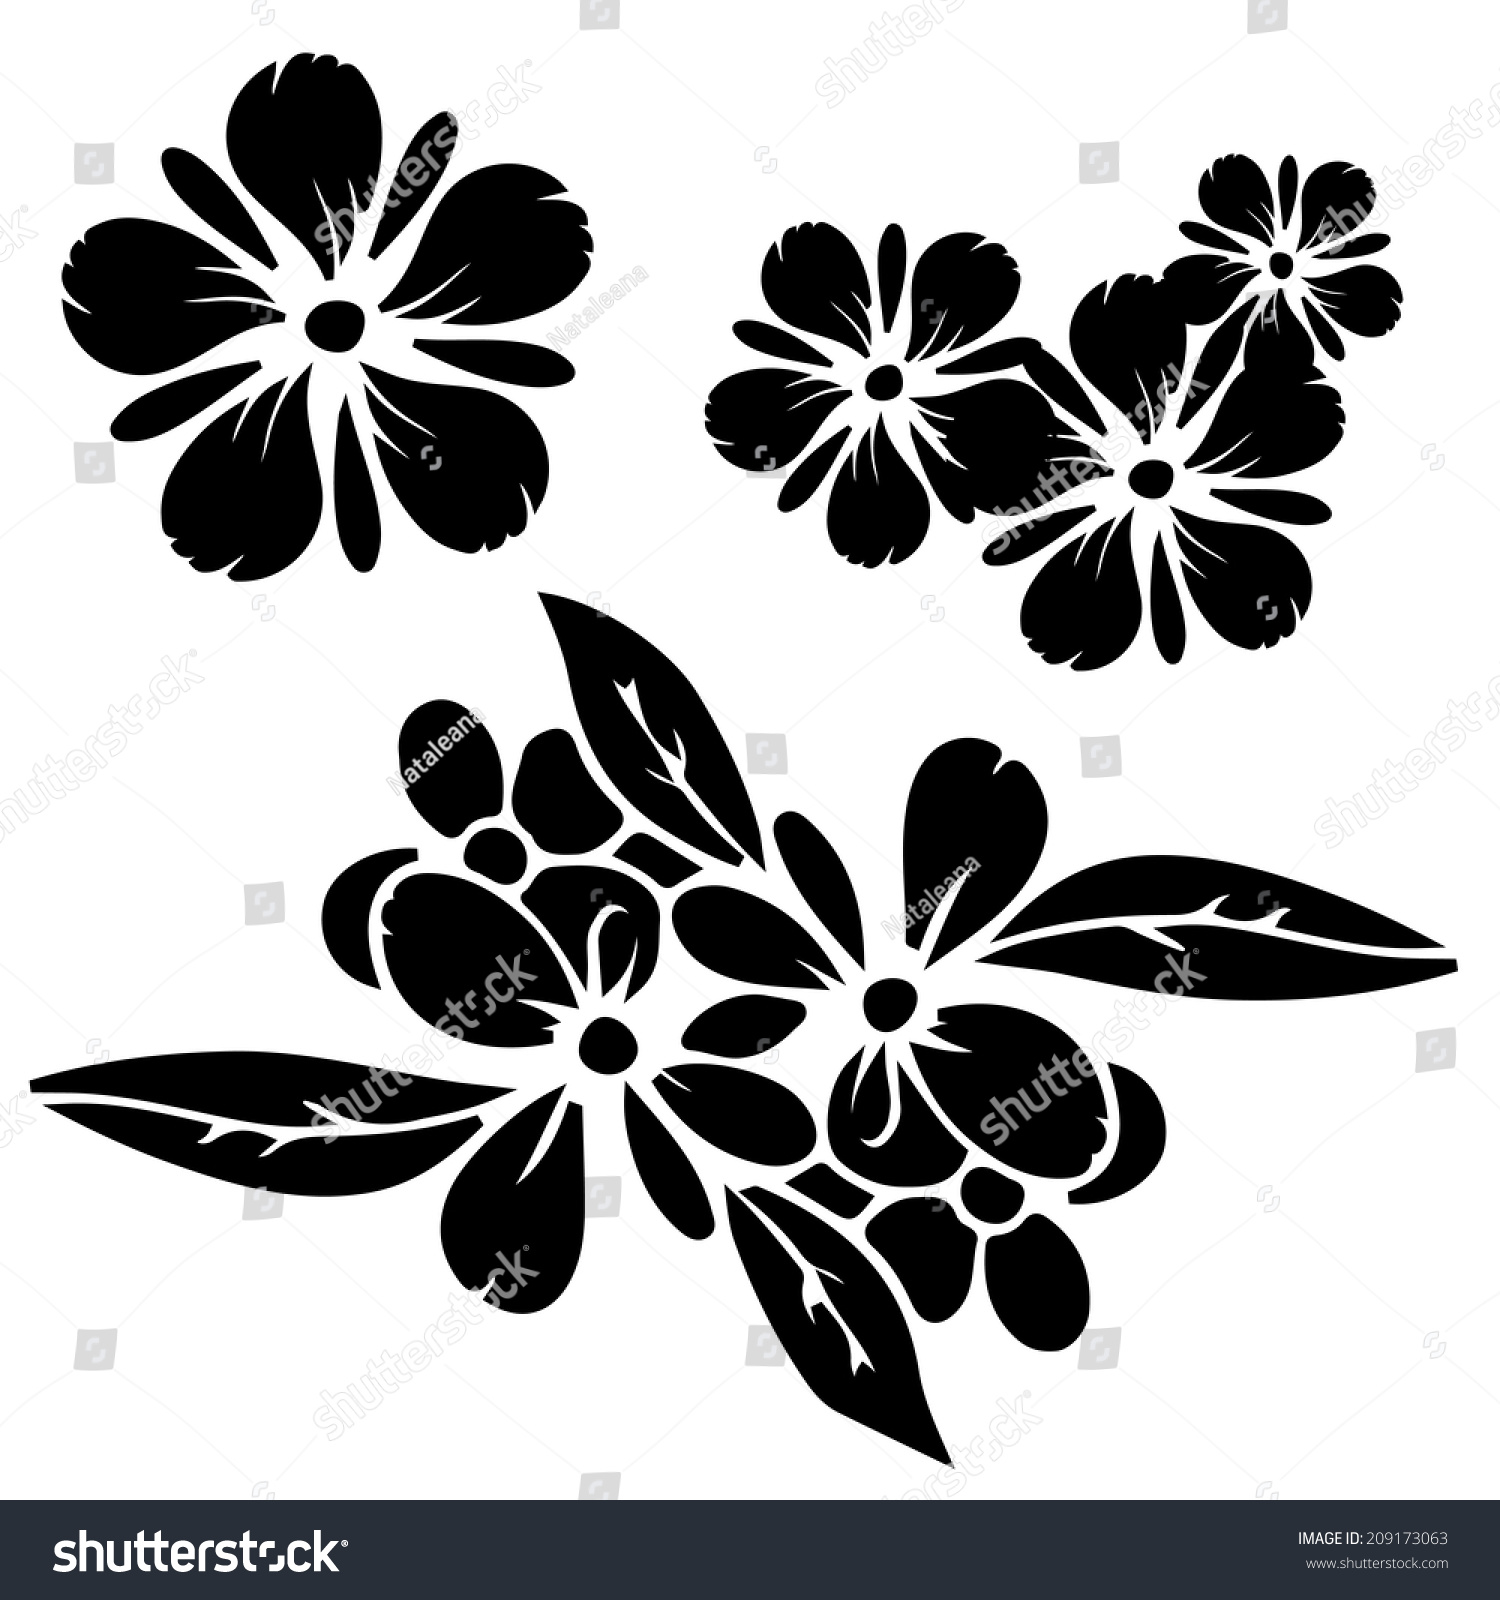 Set Black Silhouettes Flowers Isolated On A White Background. Floral ...